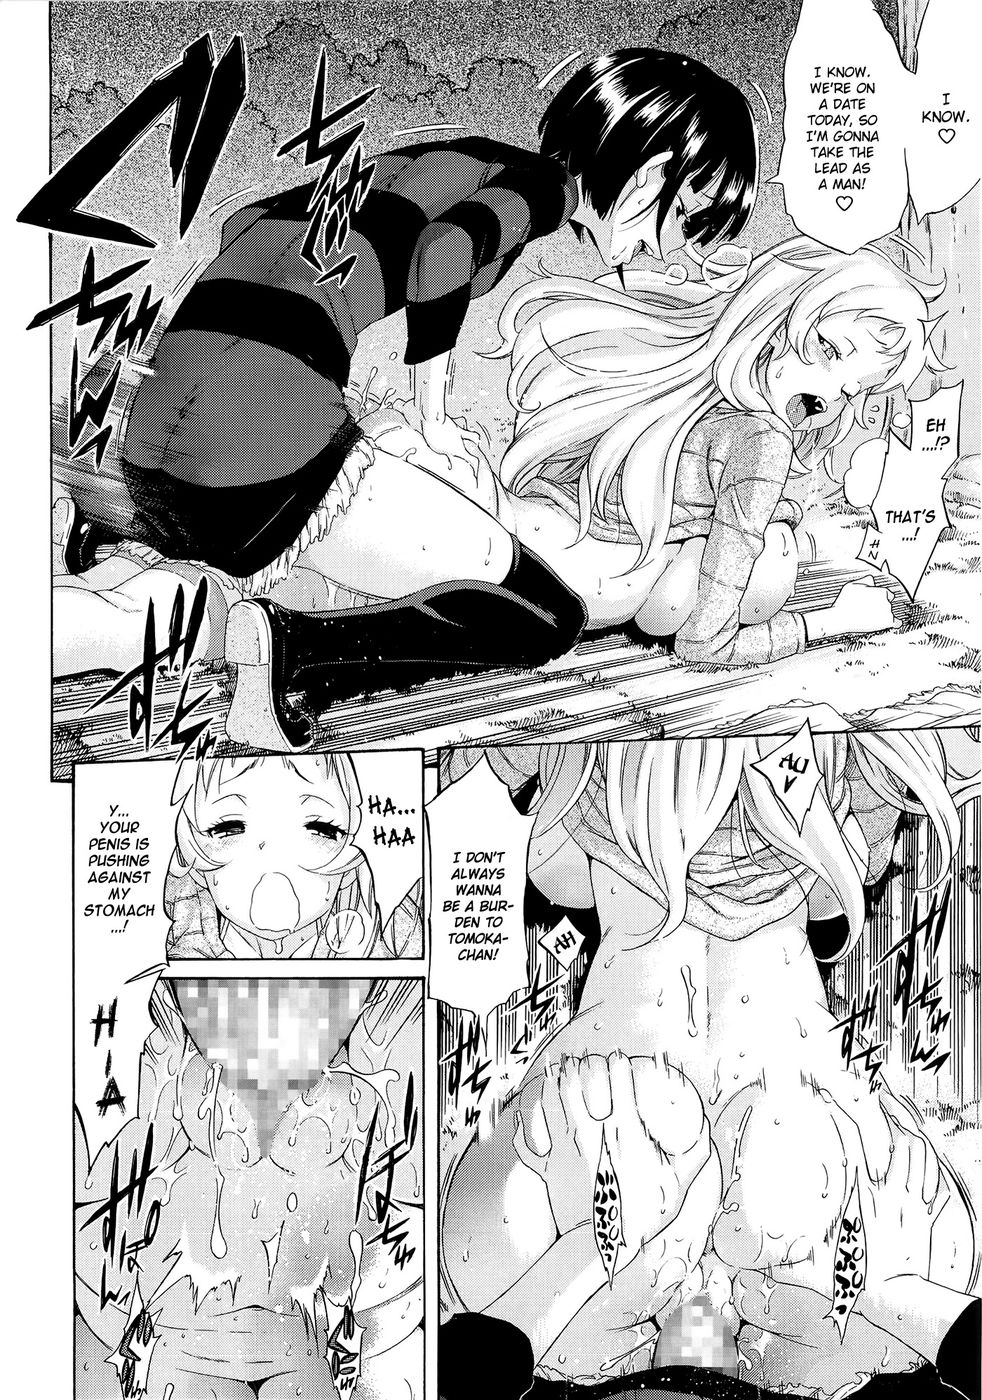 Hentai Crying Porn - Melody-Chapter 3-Cry For The Moon Relationship 2-Hentai Manga Hentai Comic  - Page: 16 - Online porn video at mobile